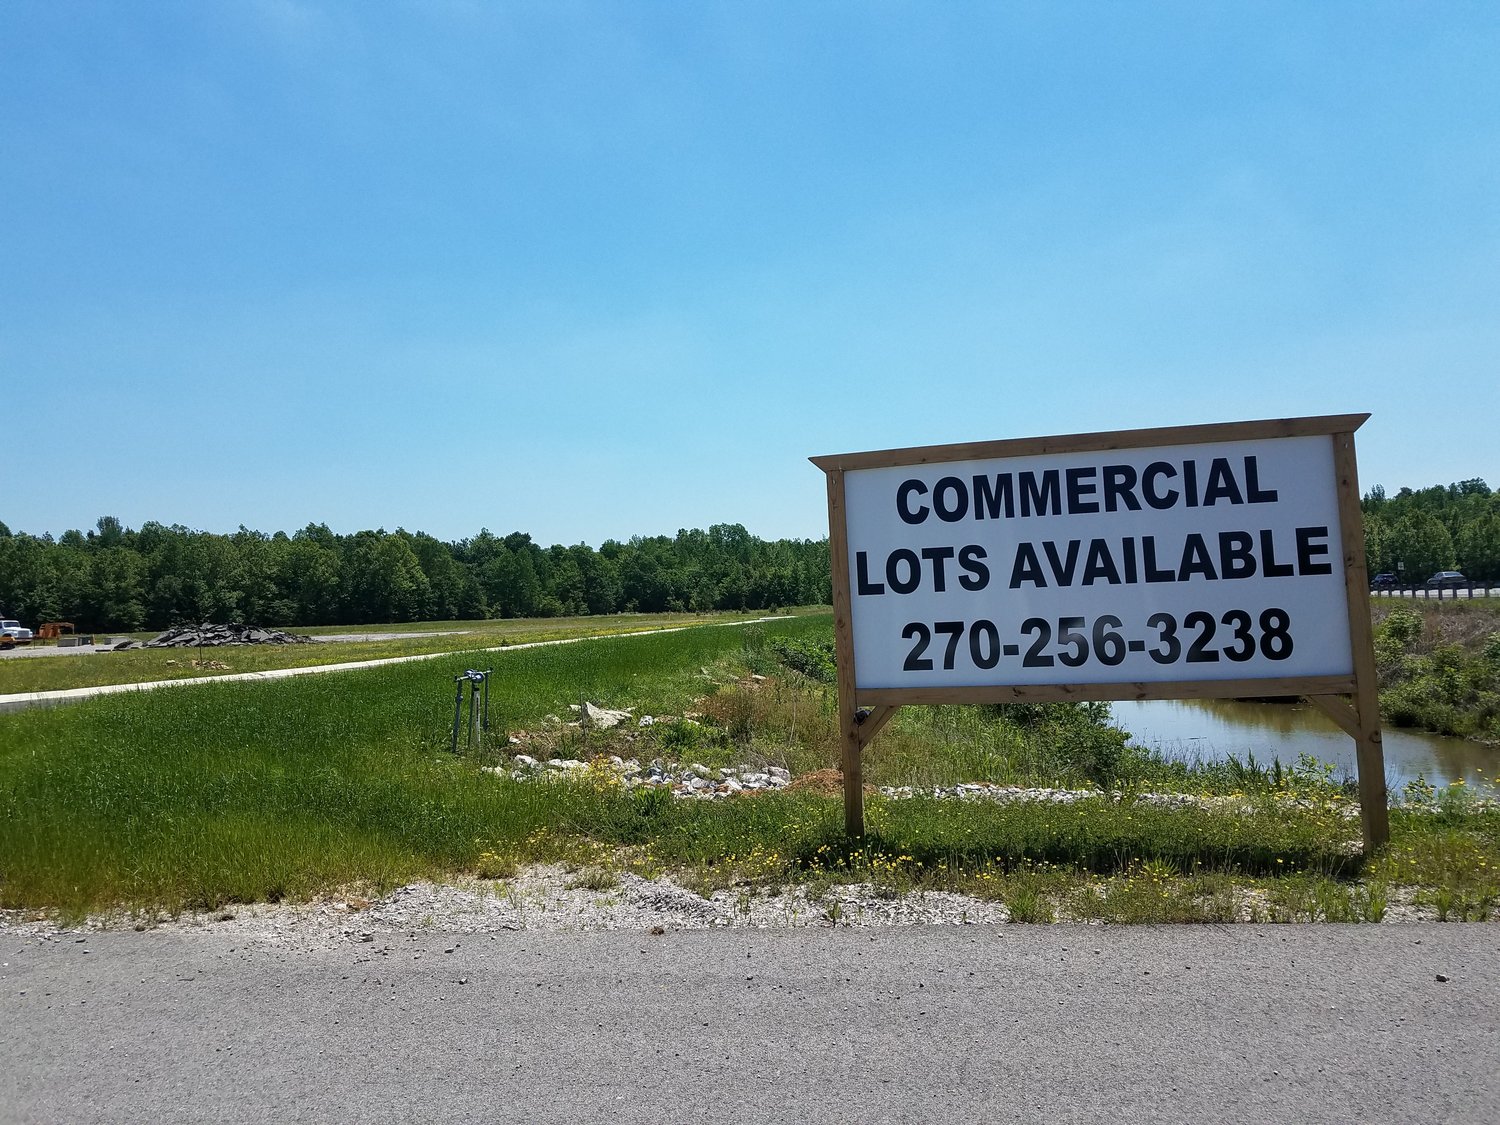 Main Photo For Highway 69 Commercial Lots